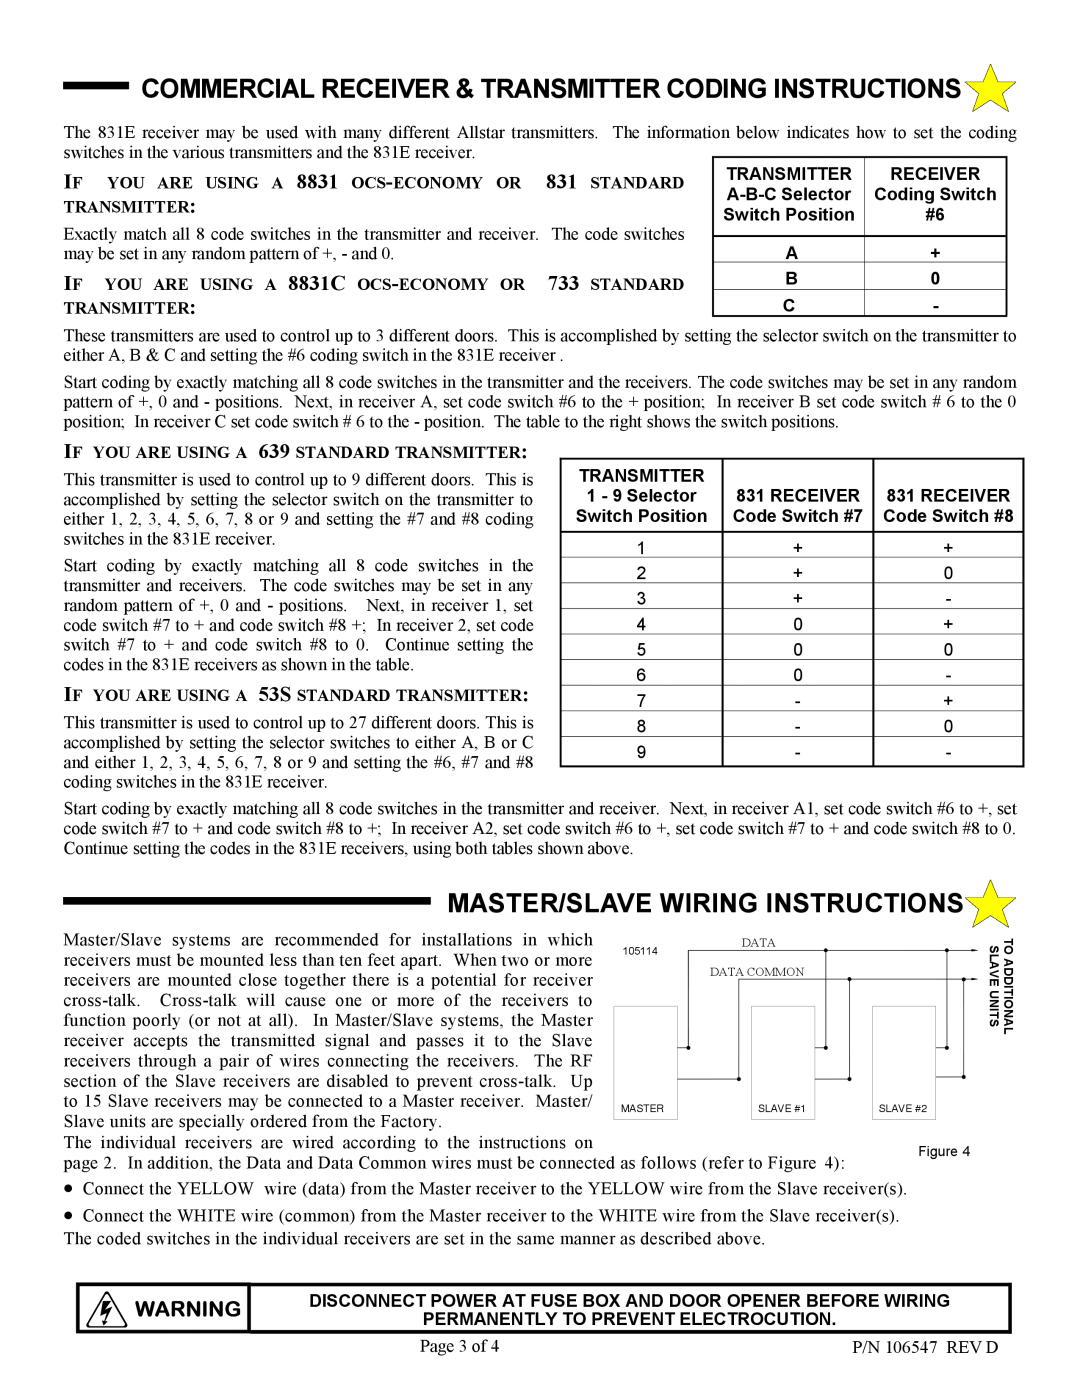 Allstar Products Group 831E Commercial Receiver & Transmitter Coding Instructions, Master/Slave Wiring Instructions 